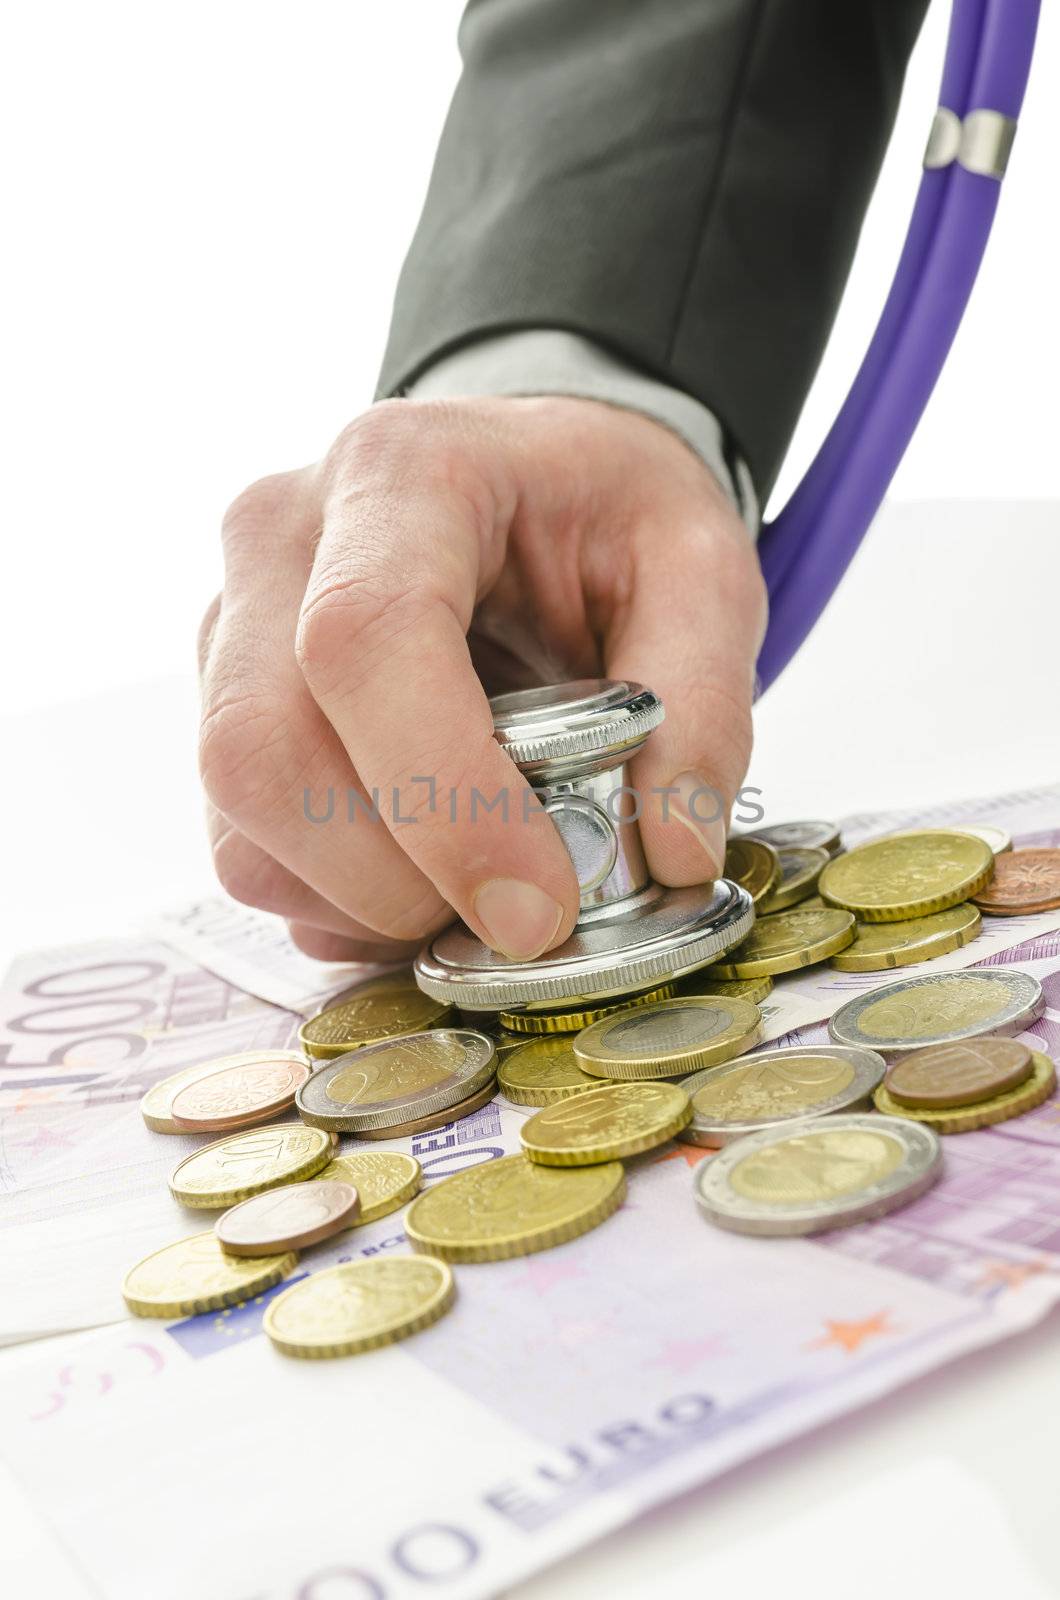 Detail of banker hand holding stethoscope over Euro coins and banknotes. Over white background.